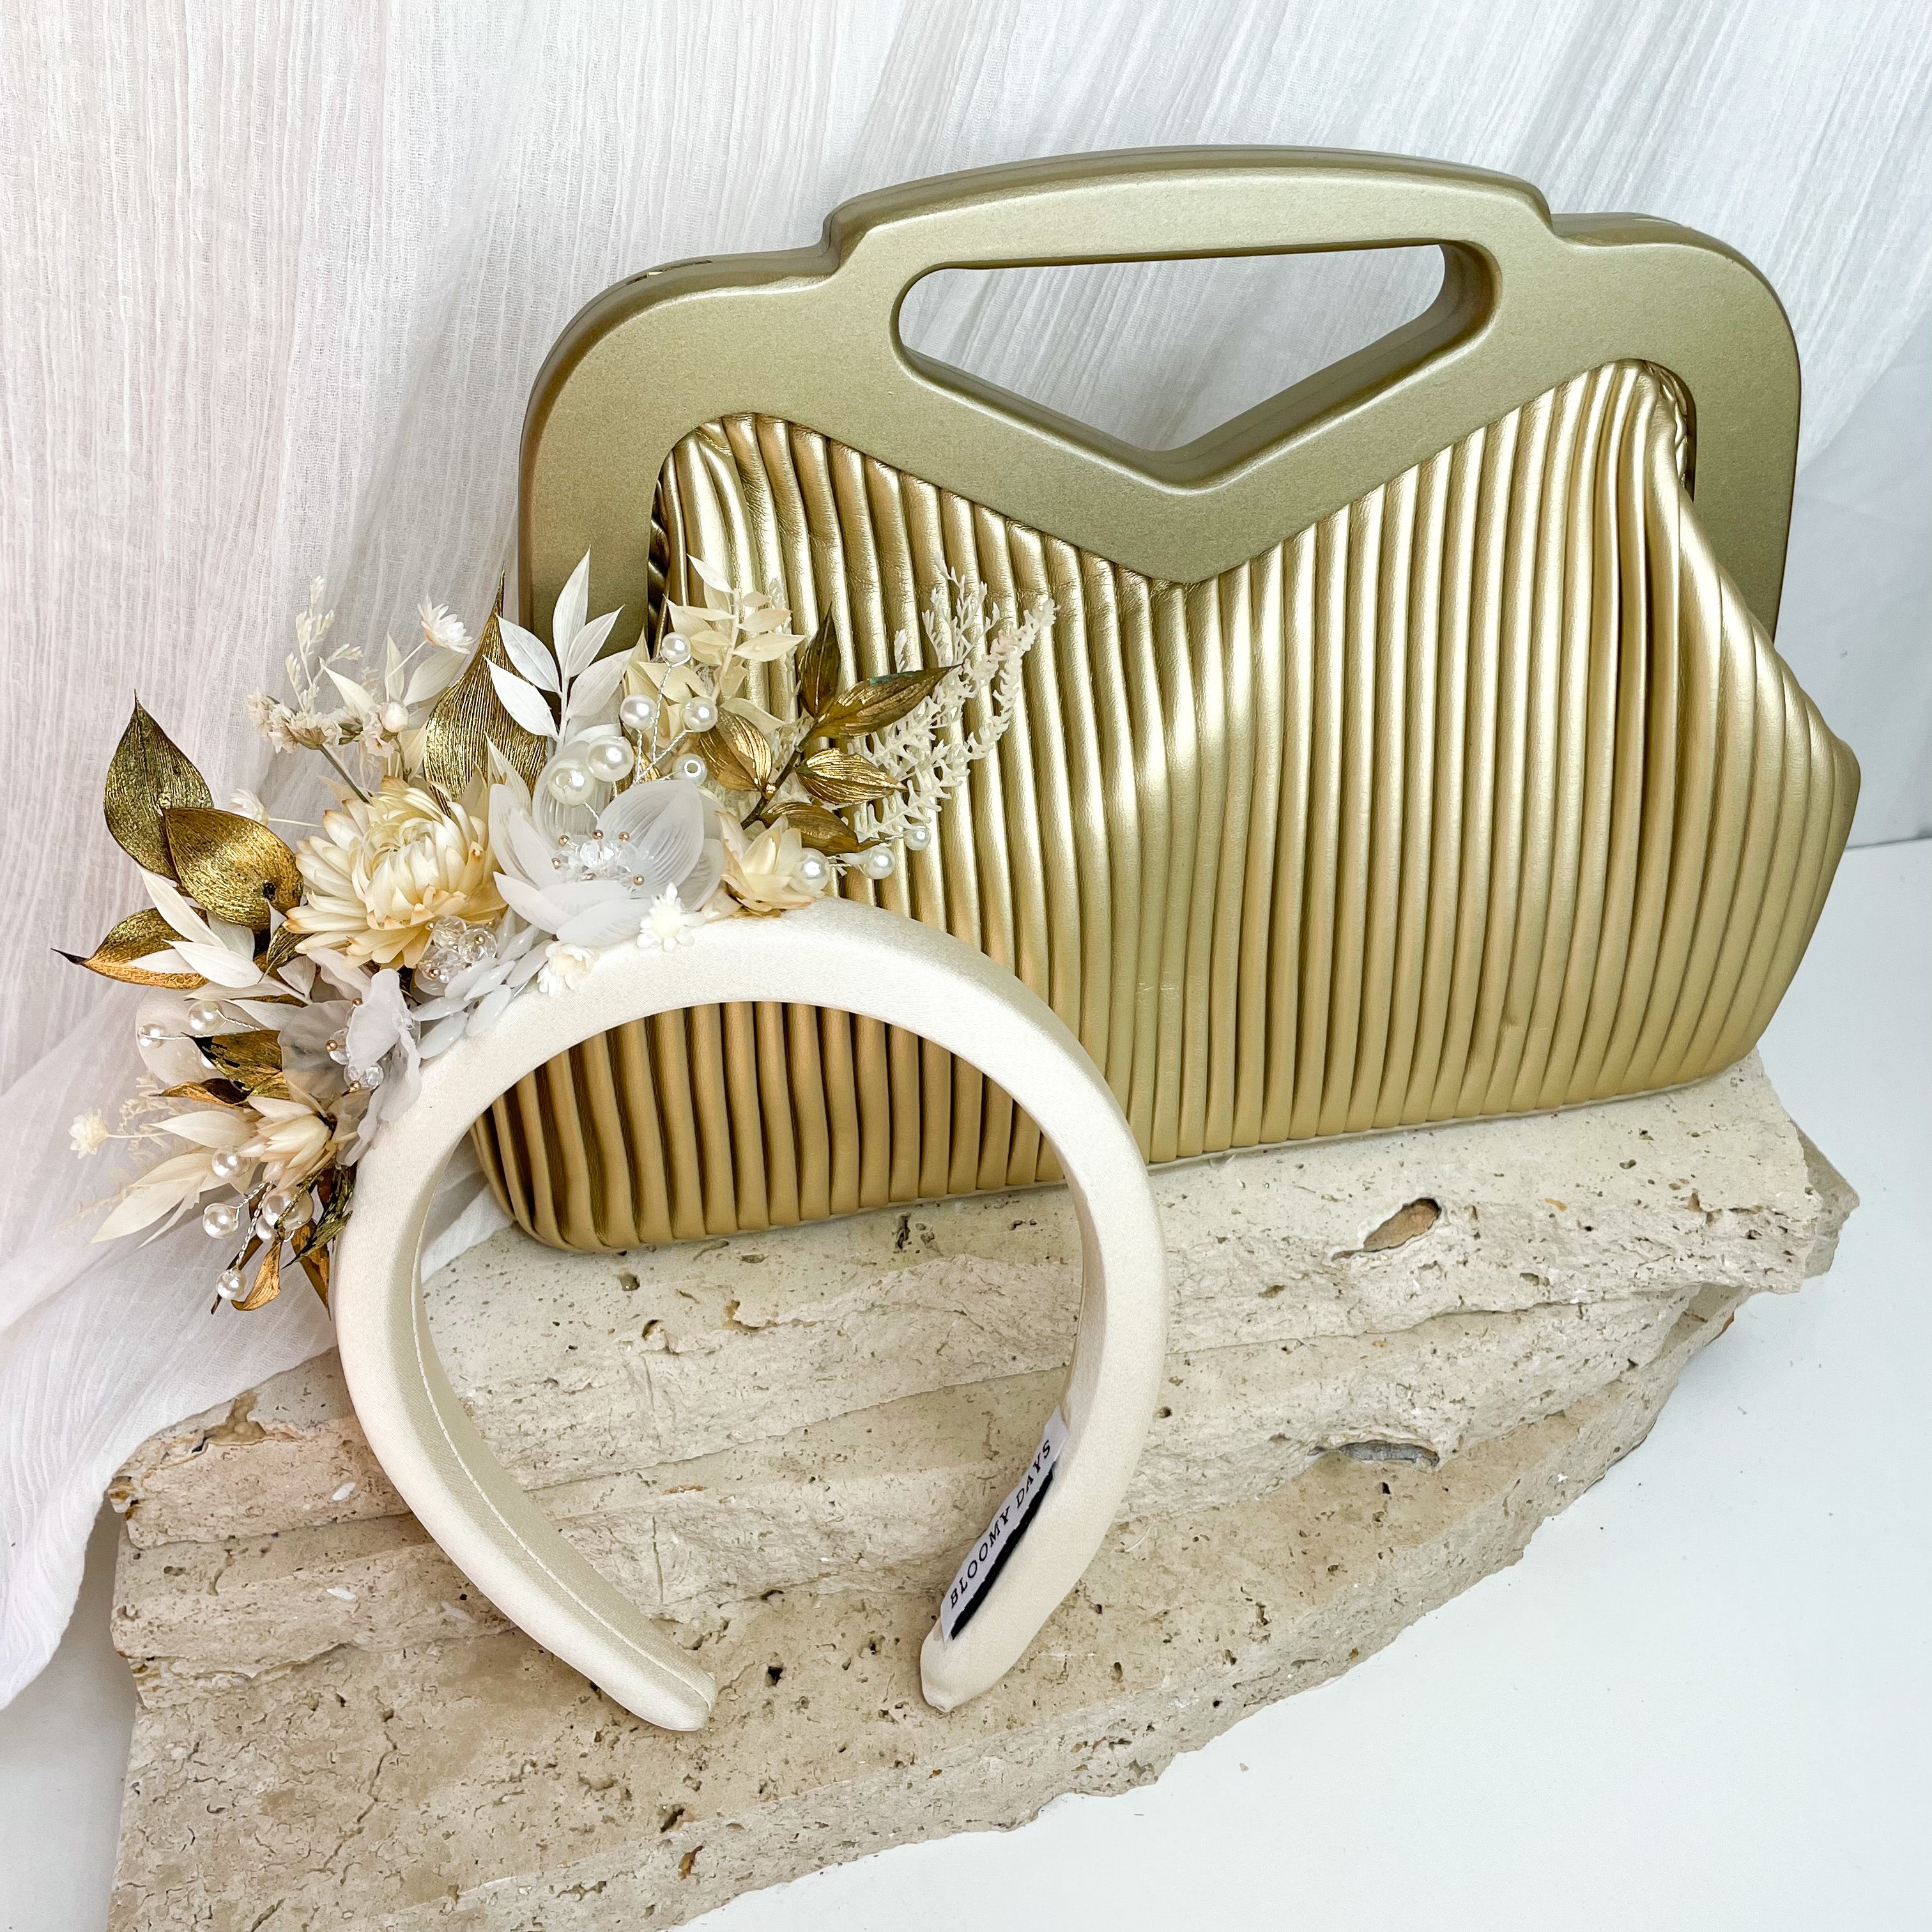 Gold Pleated Clutch Bag